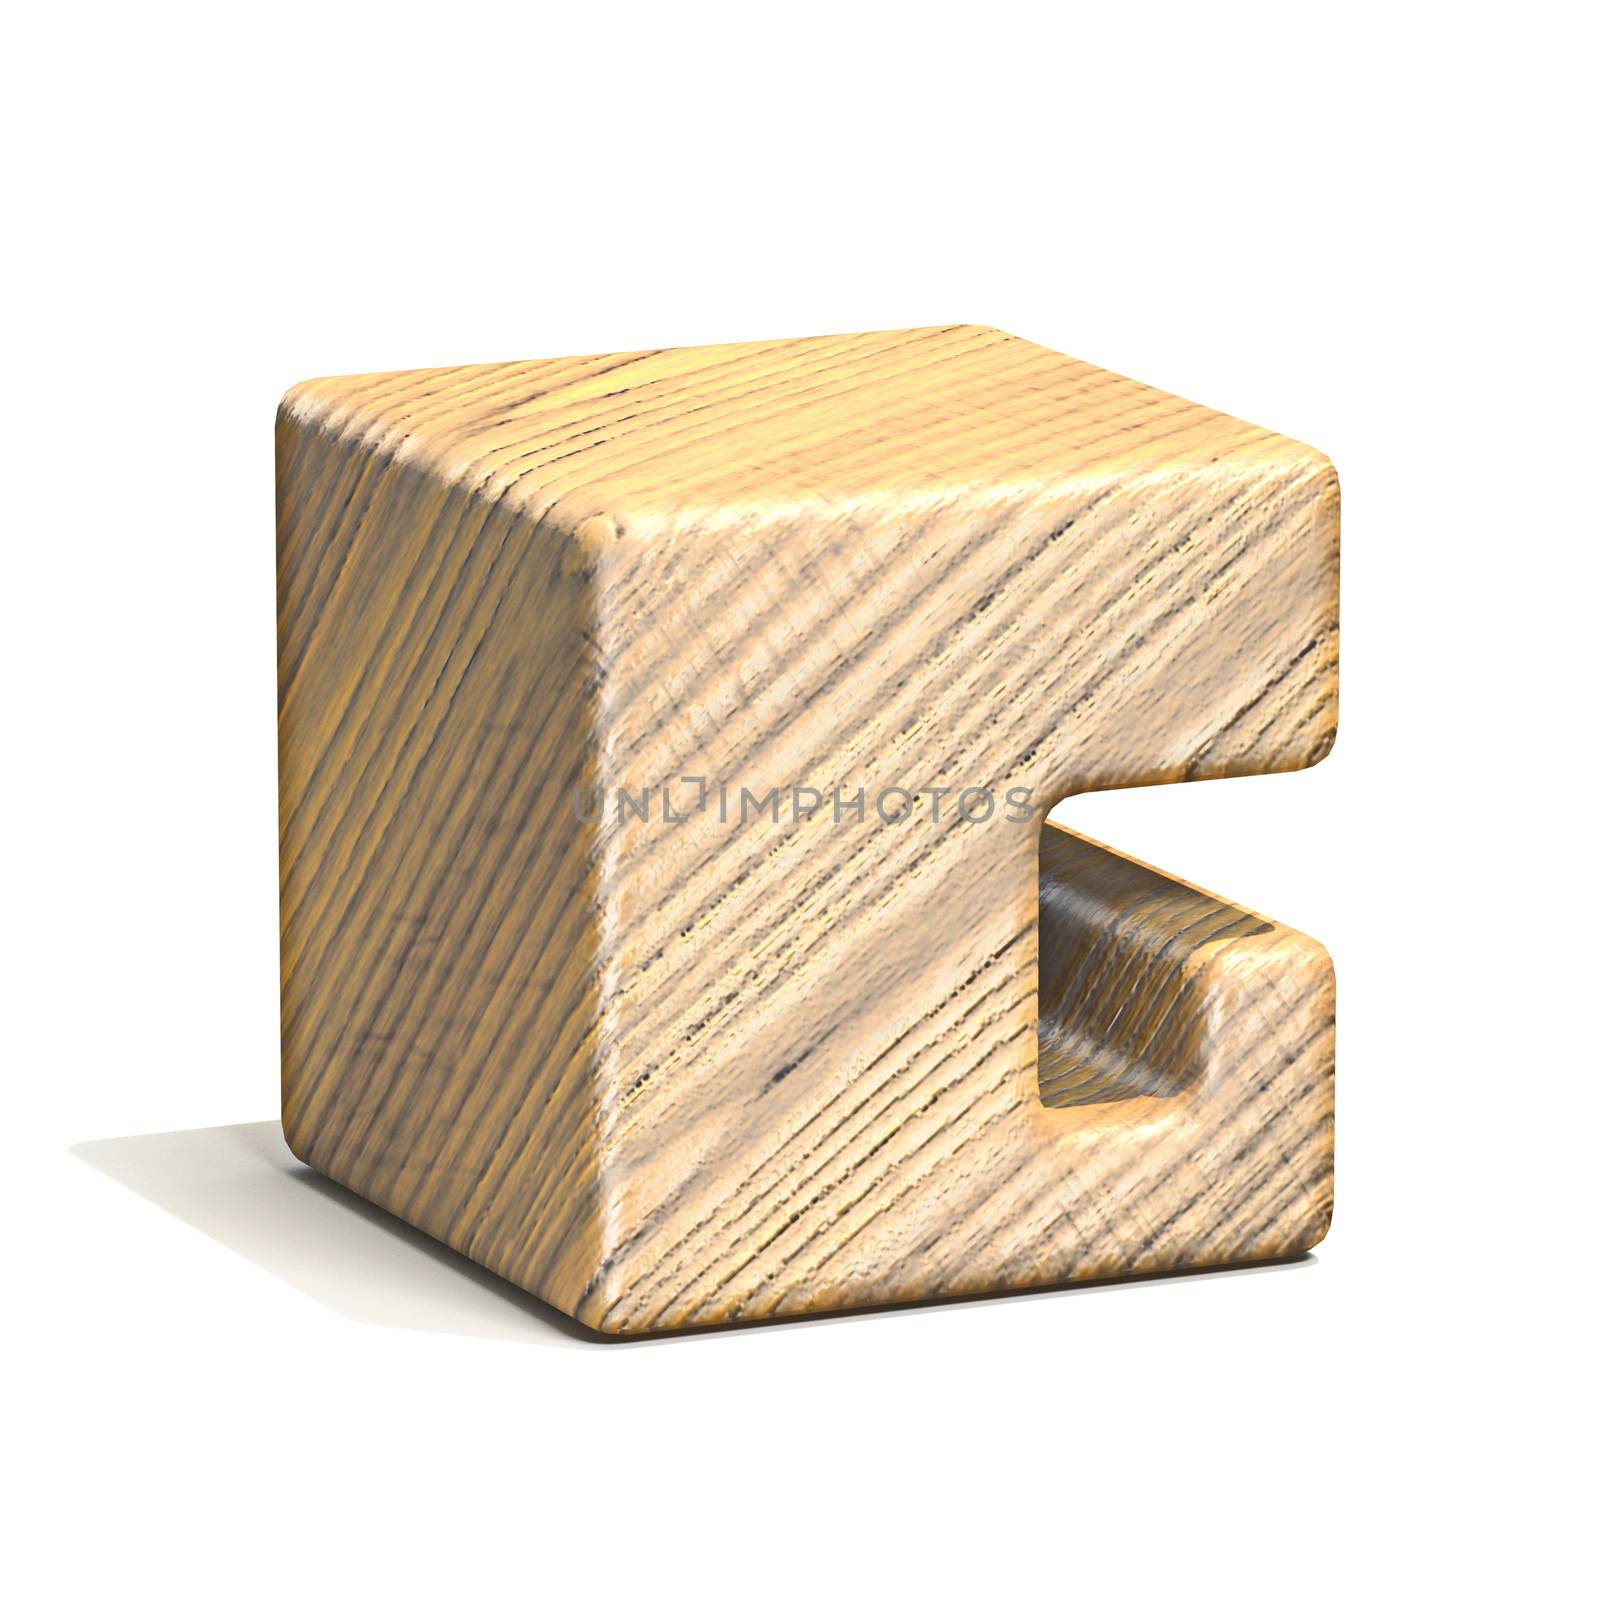 Solid wooden cube font Letter G 3D by djmilic